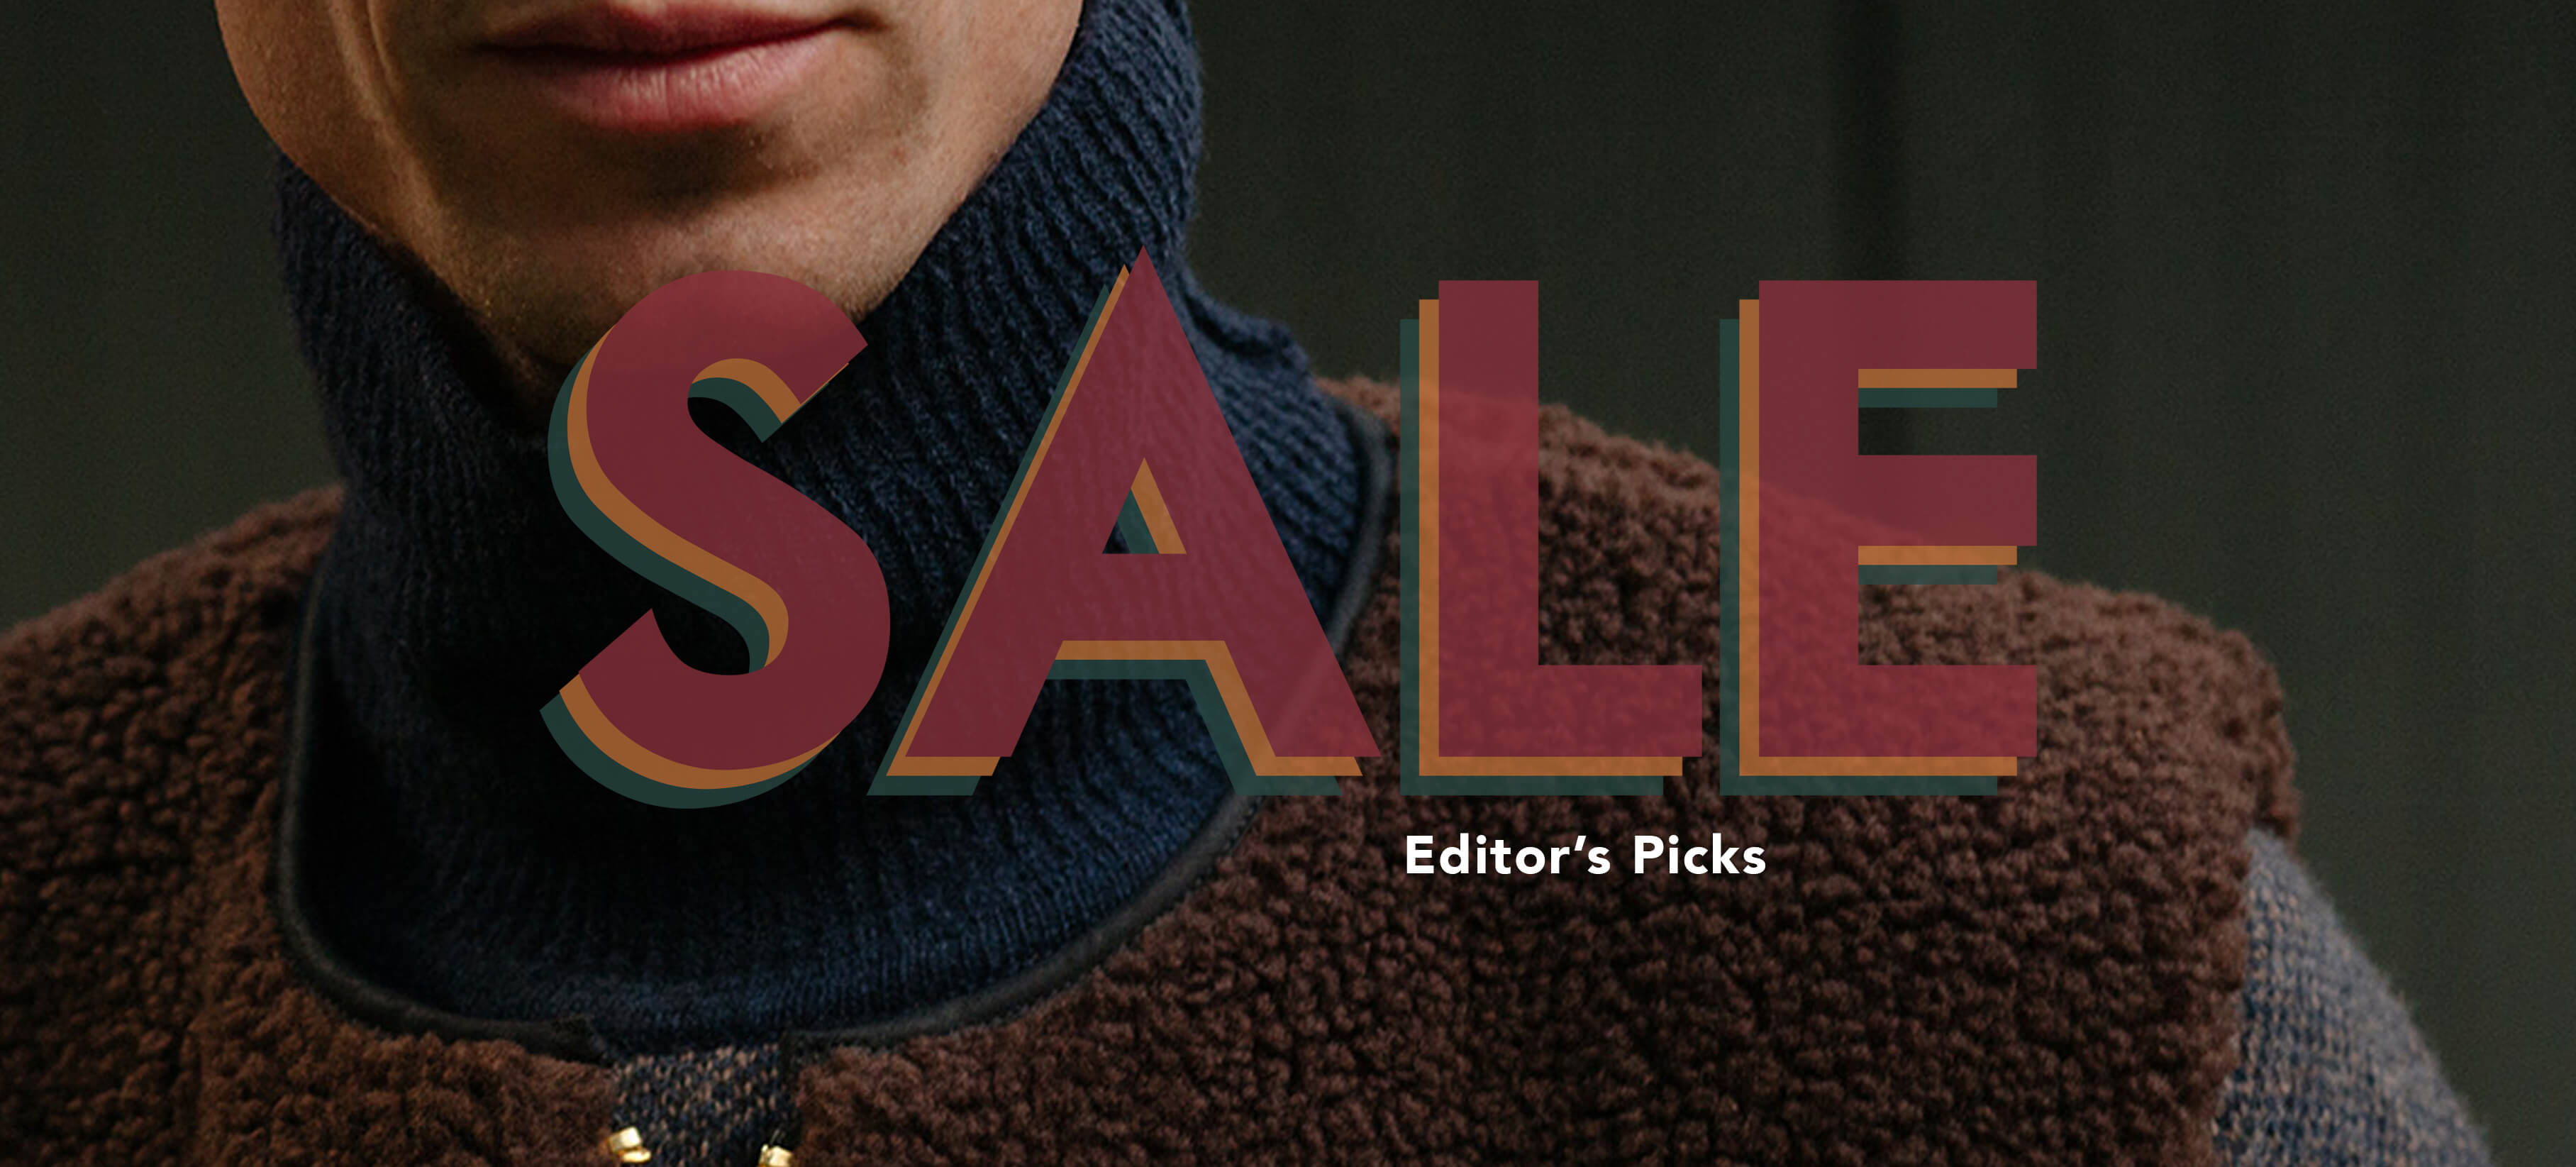 Editor's Picks: Ryan Thompson selects his year-round classics from the SALE